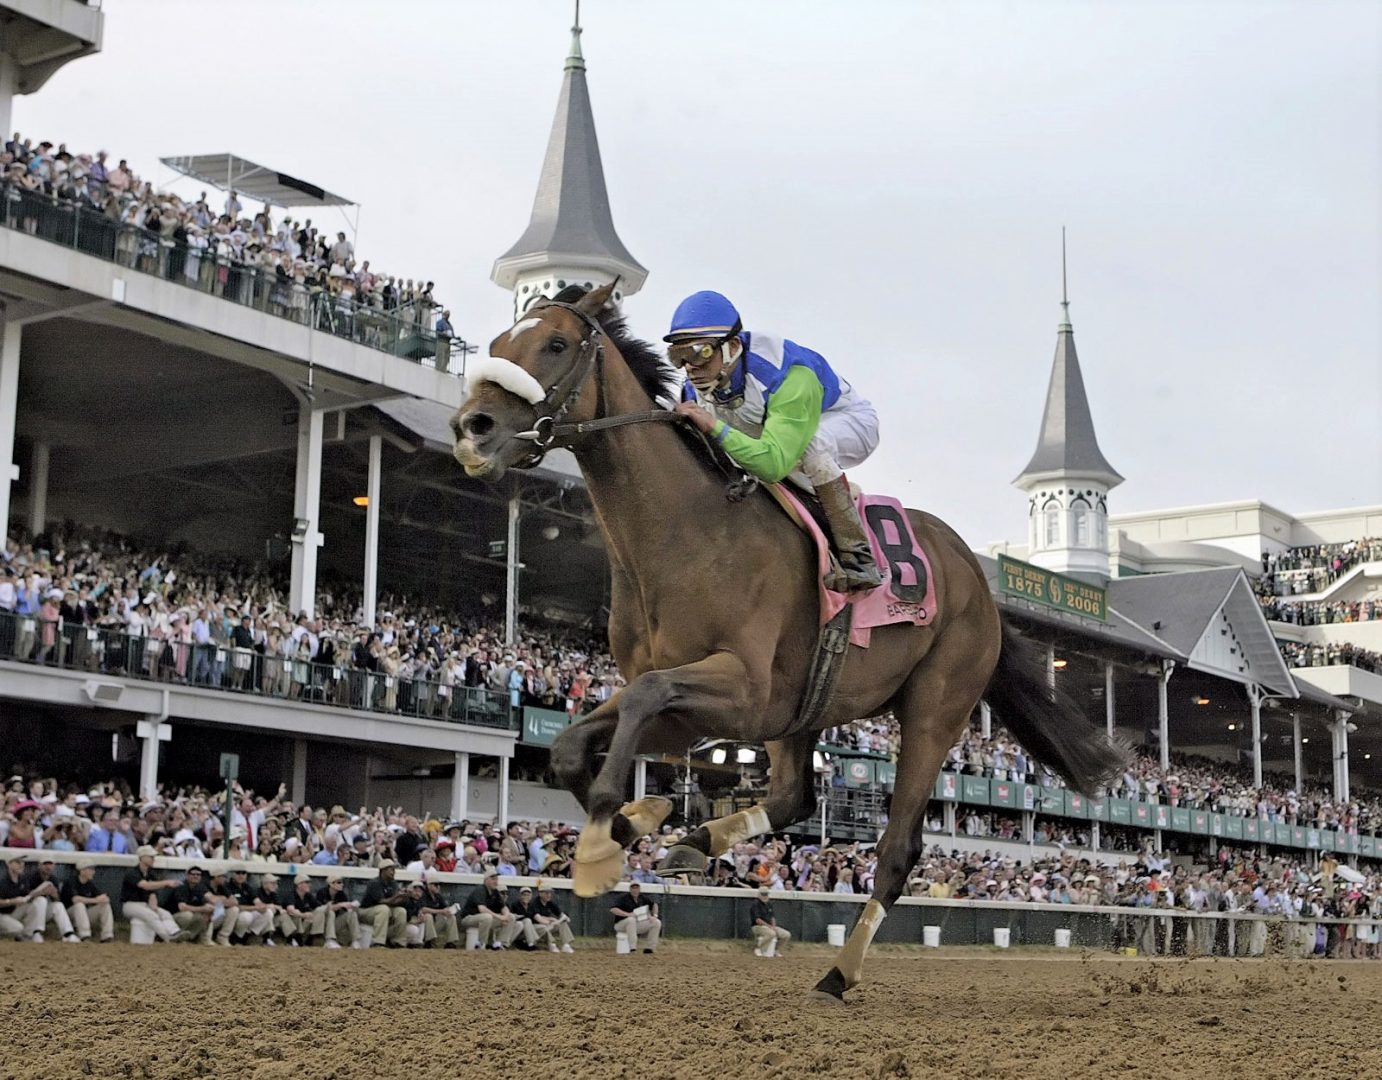 BREAKING NEWS: No fans for 146th Kentucky Derby